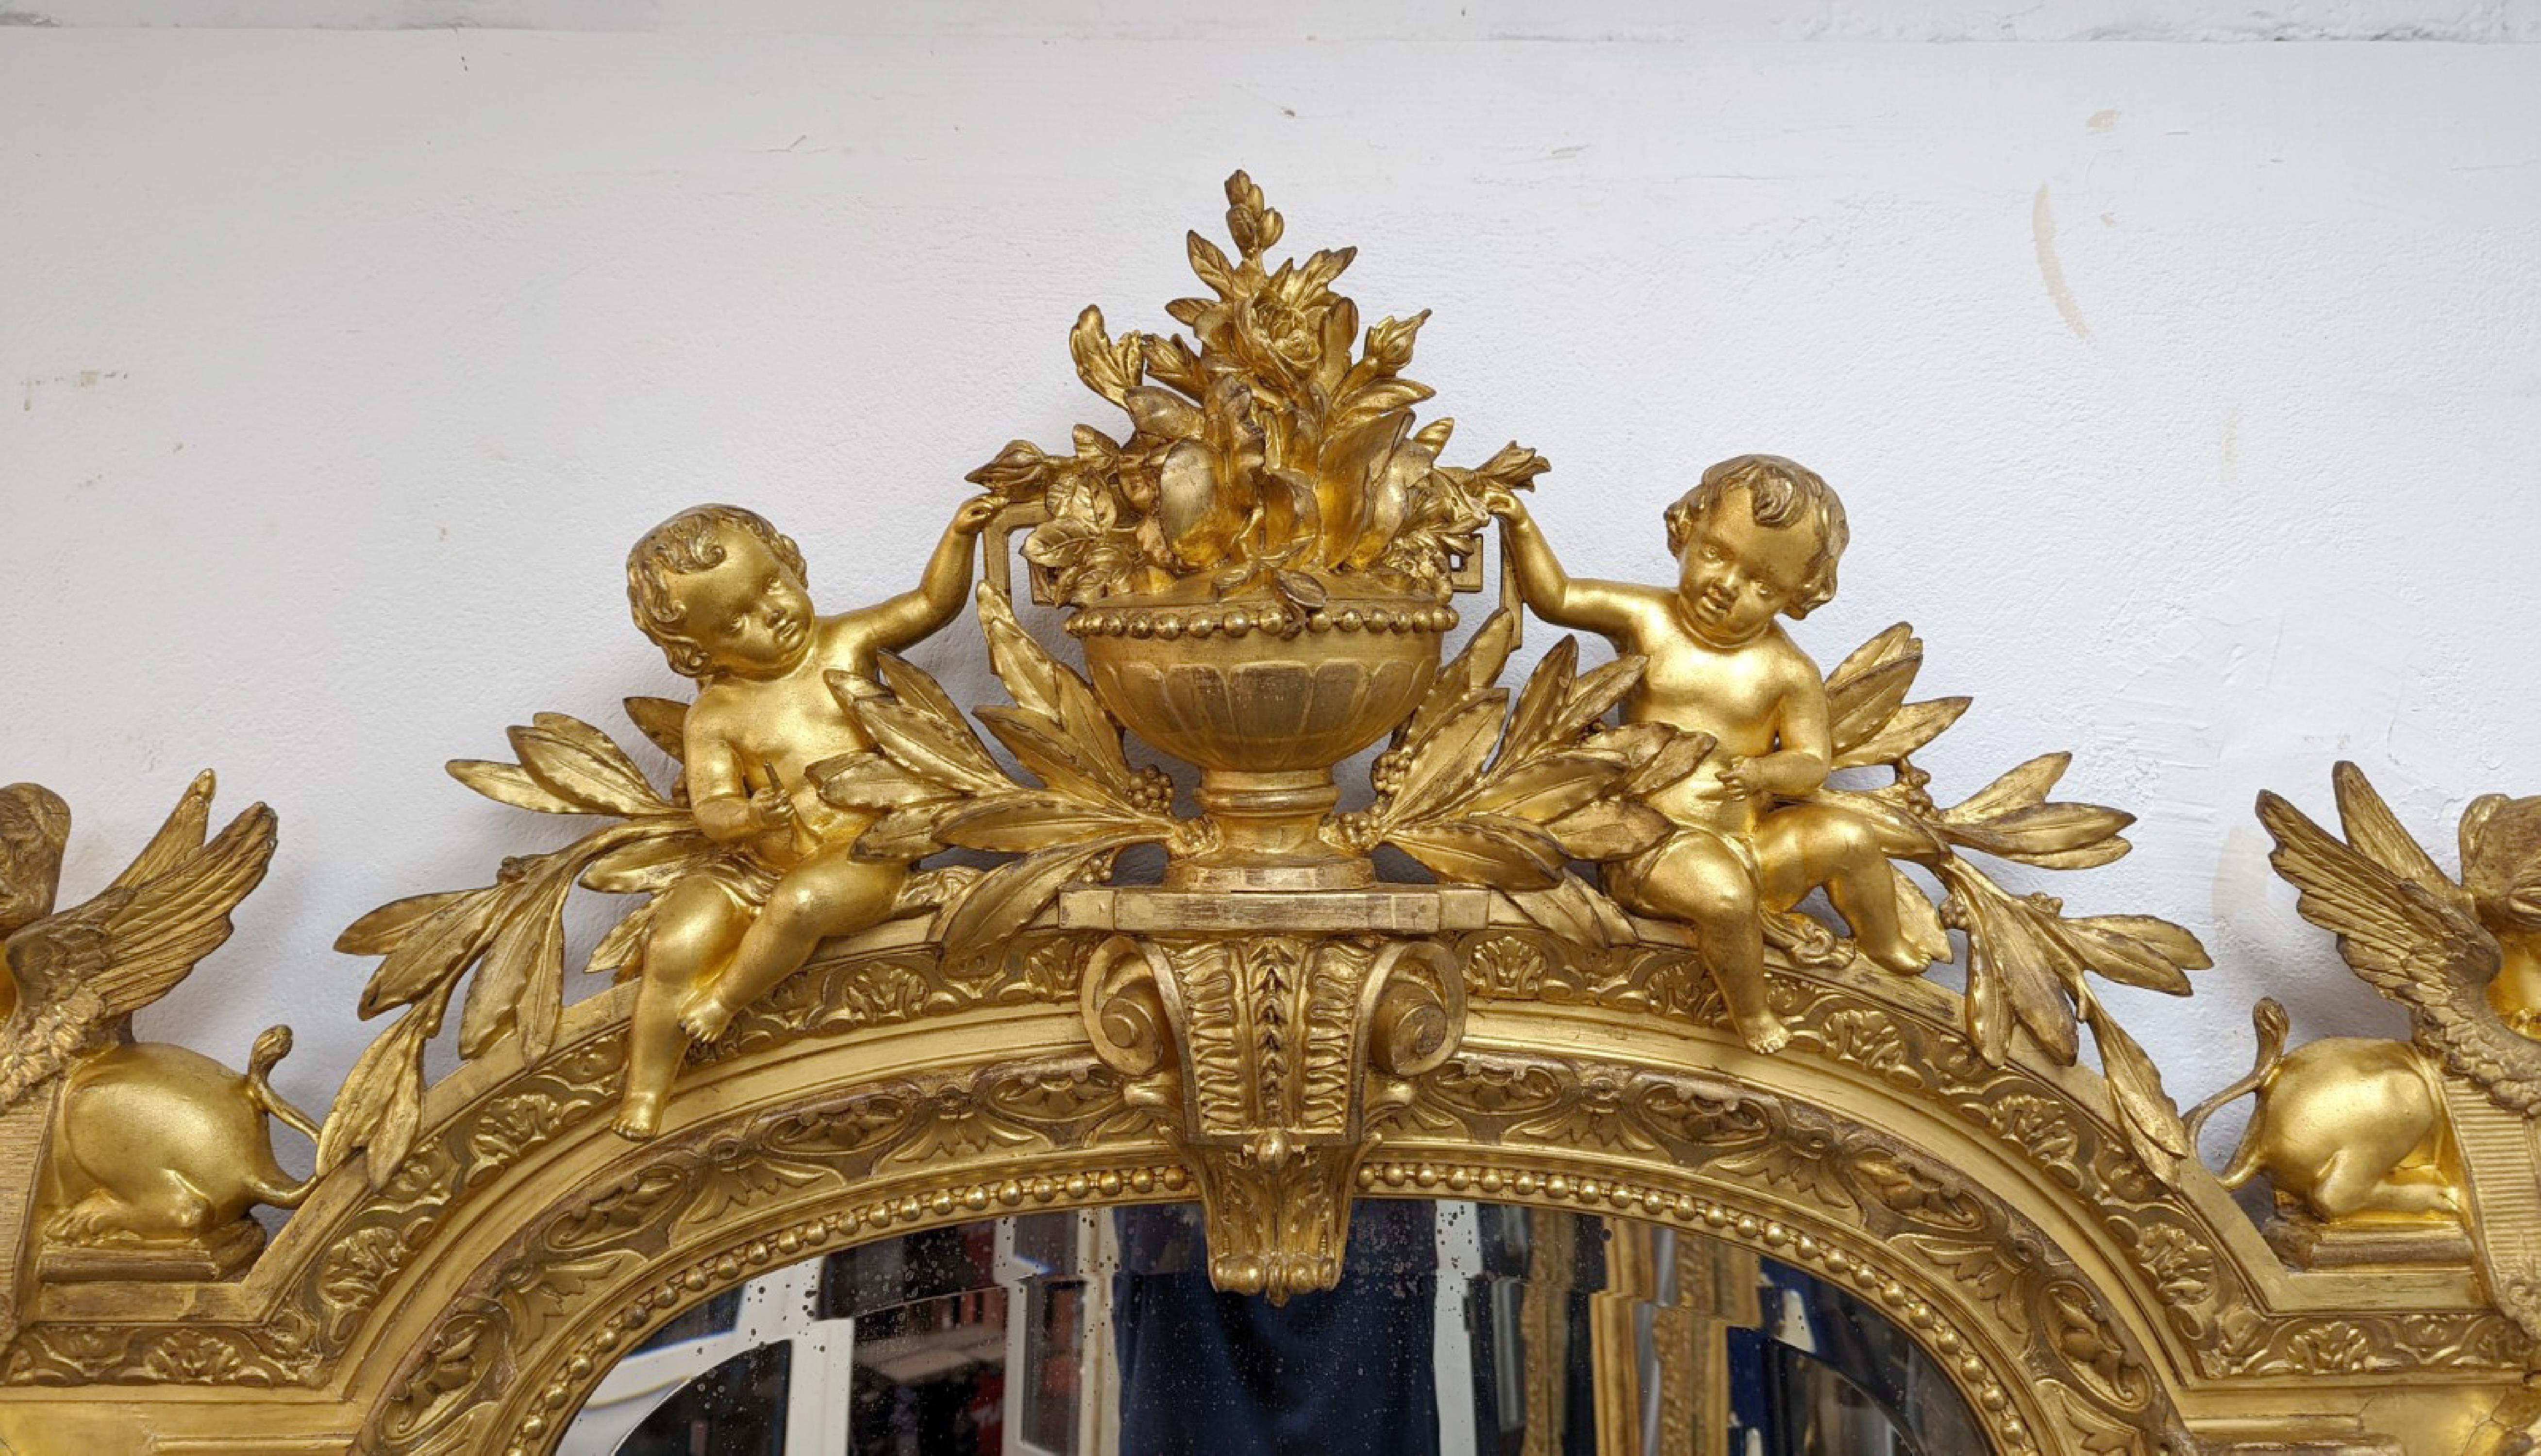 This exeptional trumeau was made gilt wood and stucco in the second half of the 19th century. It depicts a lavish high-relief decoration typical of the Second Empire style, giving prominence to sumptuousness and abundance of decoration often in